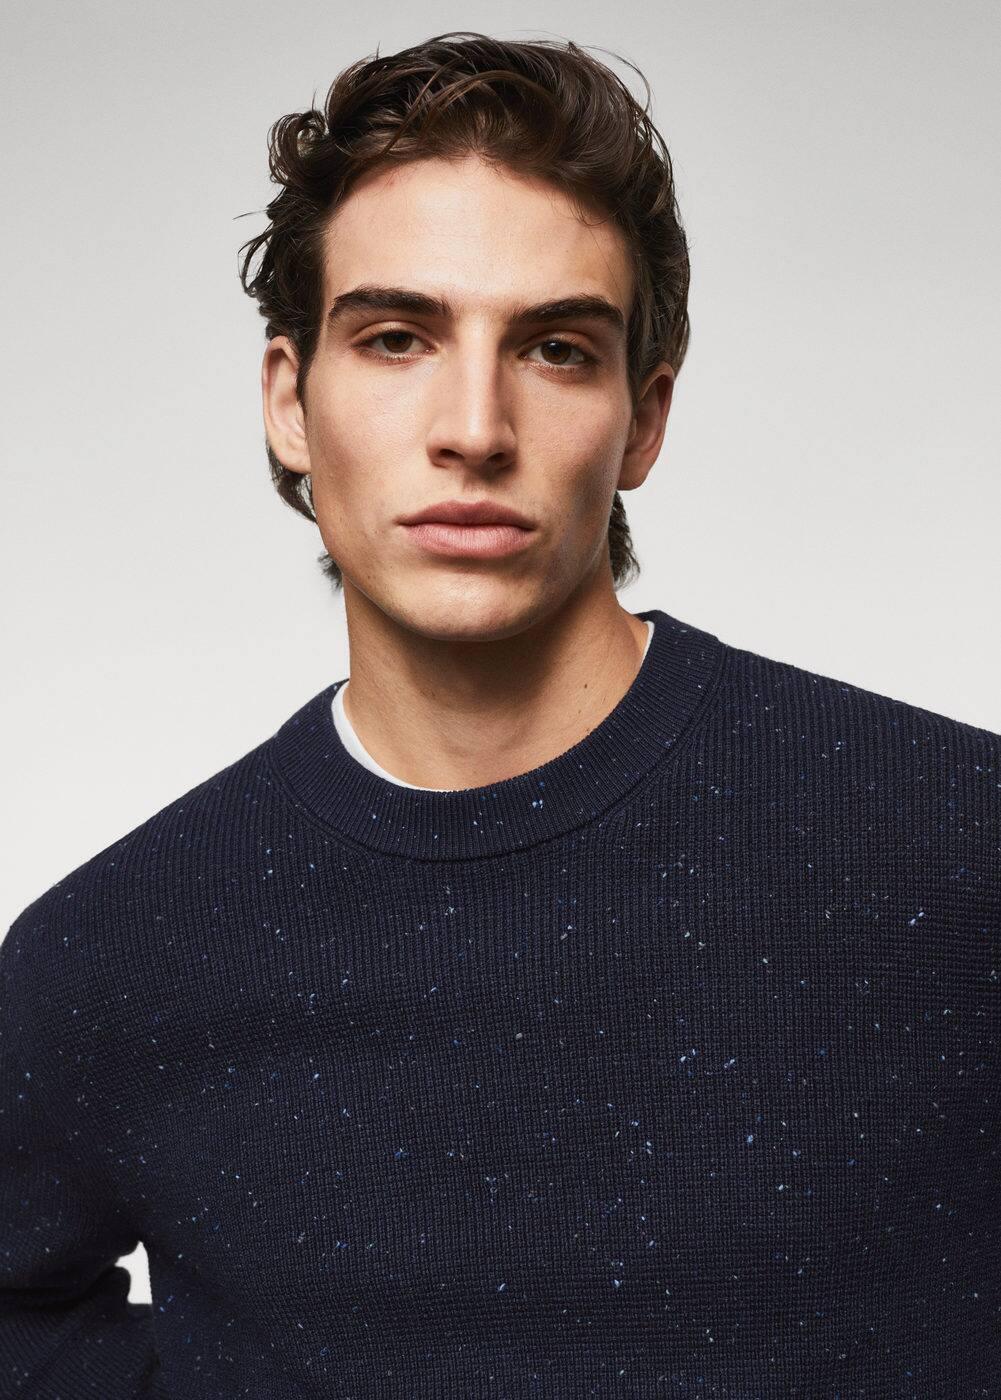 MANGO MAN - Structured flecked sweater navy - L - Men Product Image